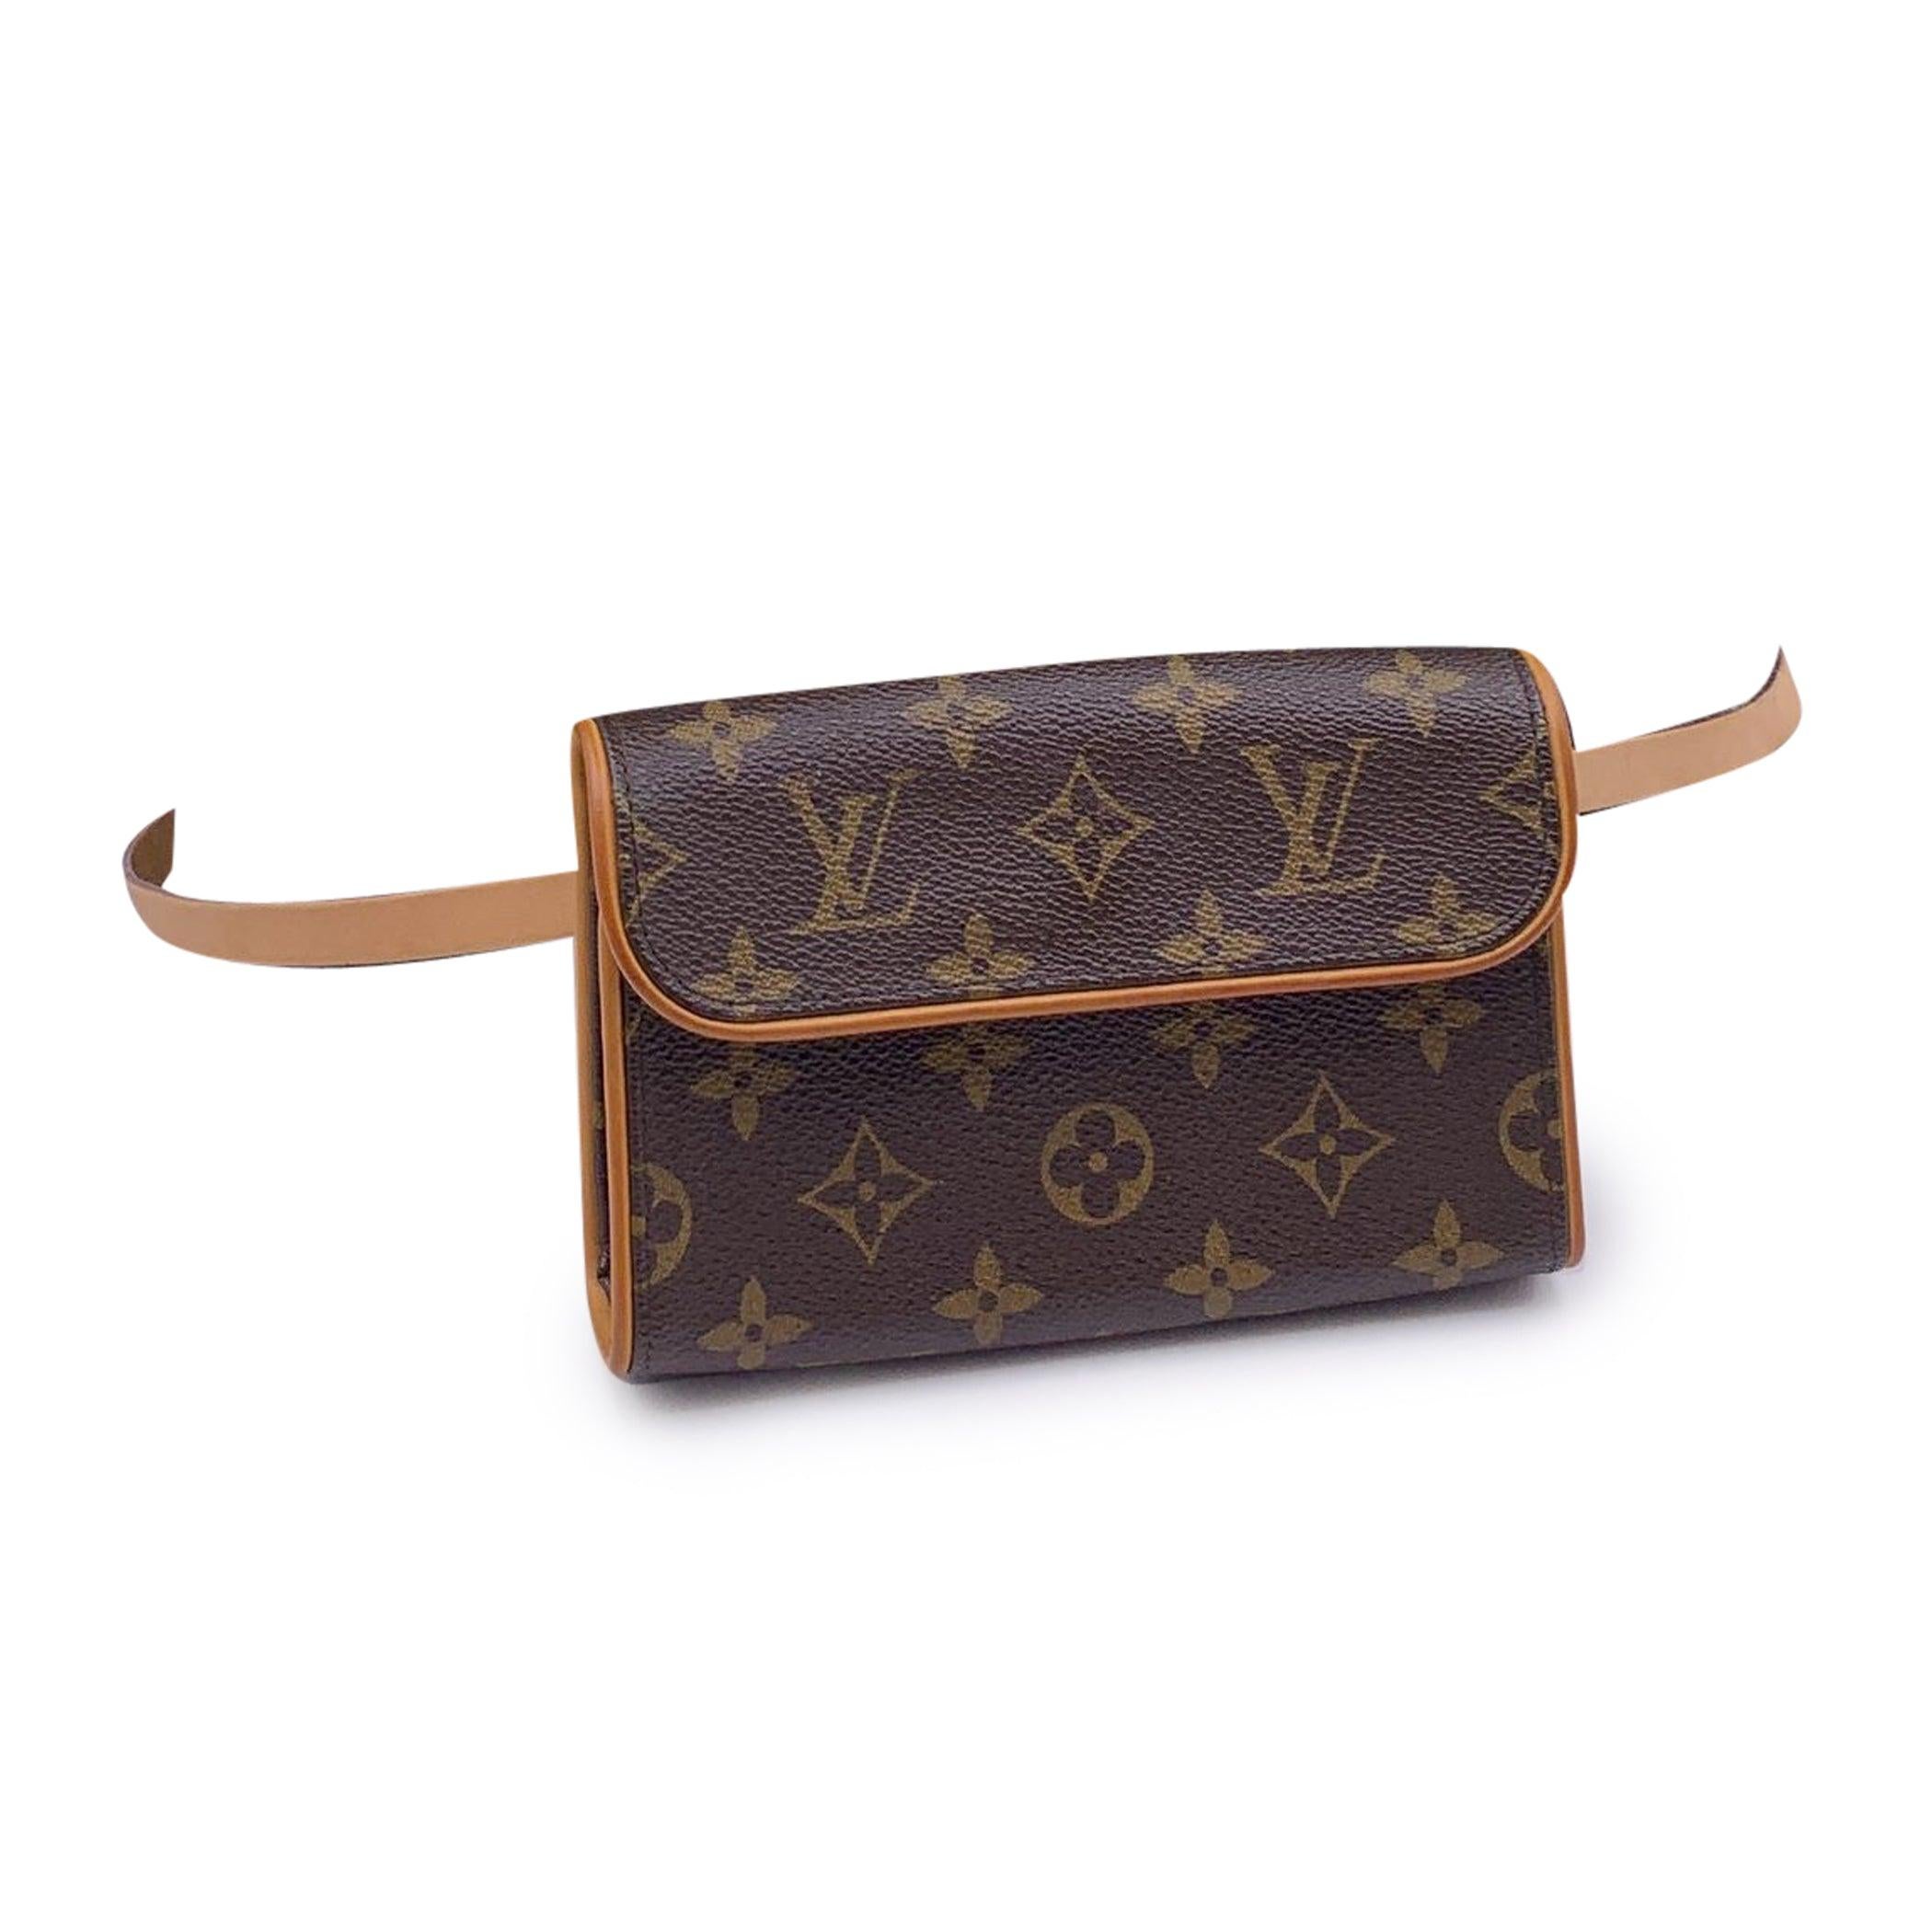 This beautiful Bag will come with a Certificate of Authenticity provided by Entrupy. The certificate will be provided at no further cost Beautiful Louis Vuitton 'Florentine Pochette' waist bag in brown monogram canvas with brown genuine leather